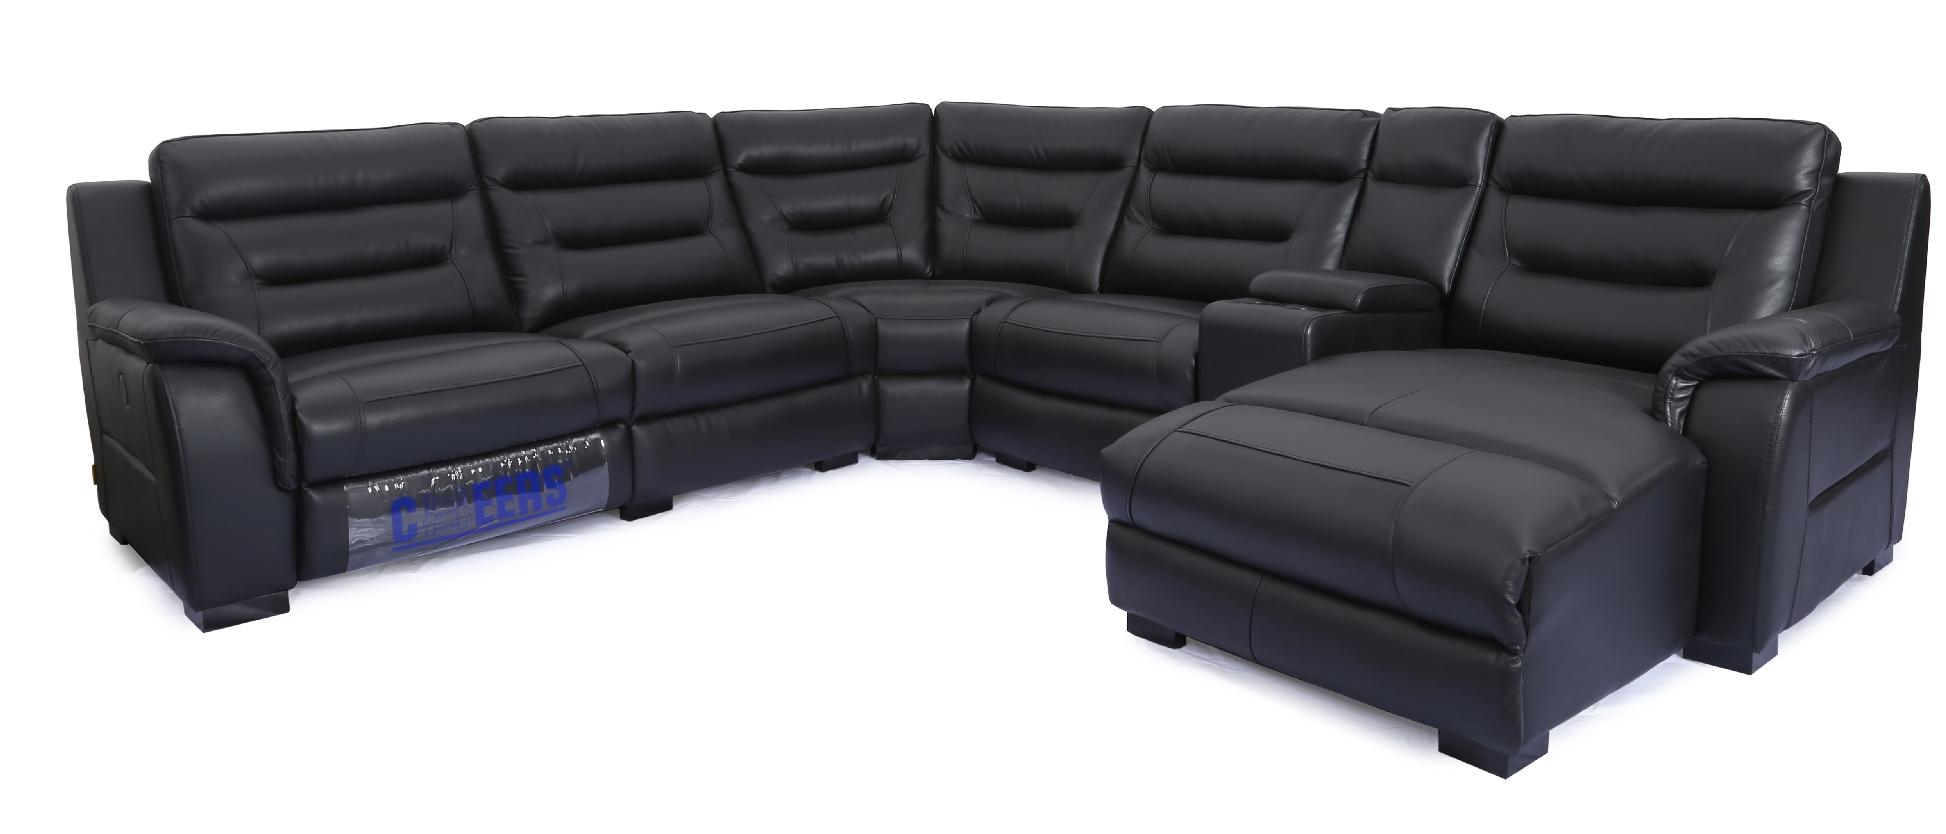 5331 LEATHER CORNER LOUNGE WITH RECLINERS